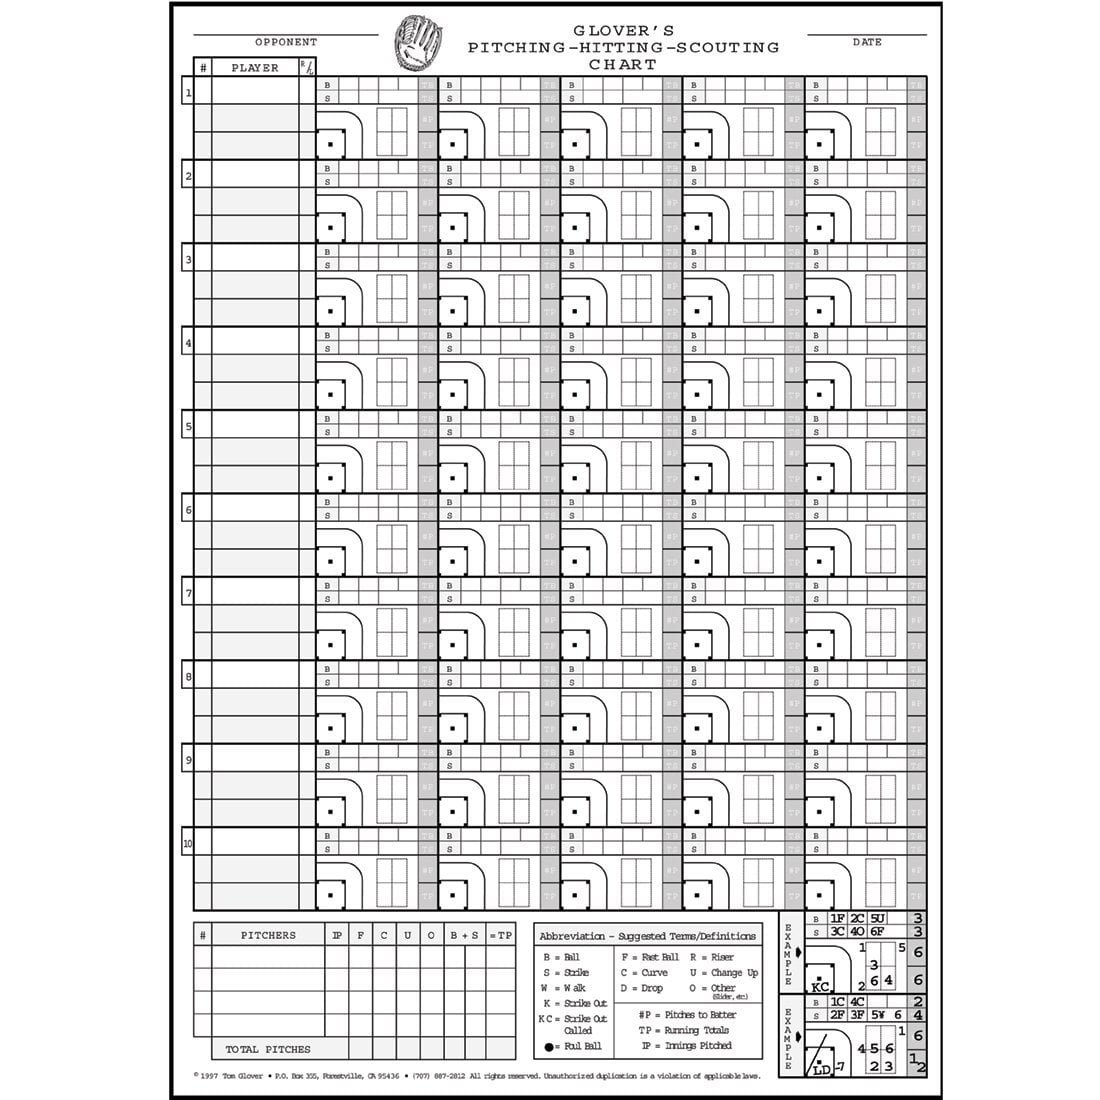 Glover Pitching/Hitting Scouting Charts, 23